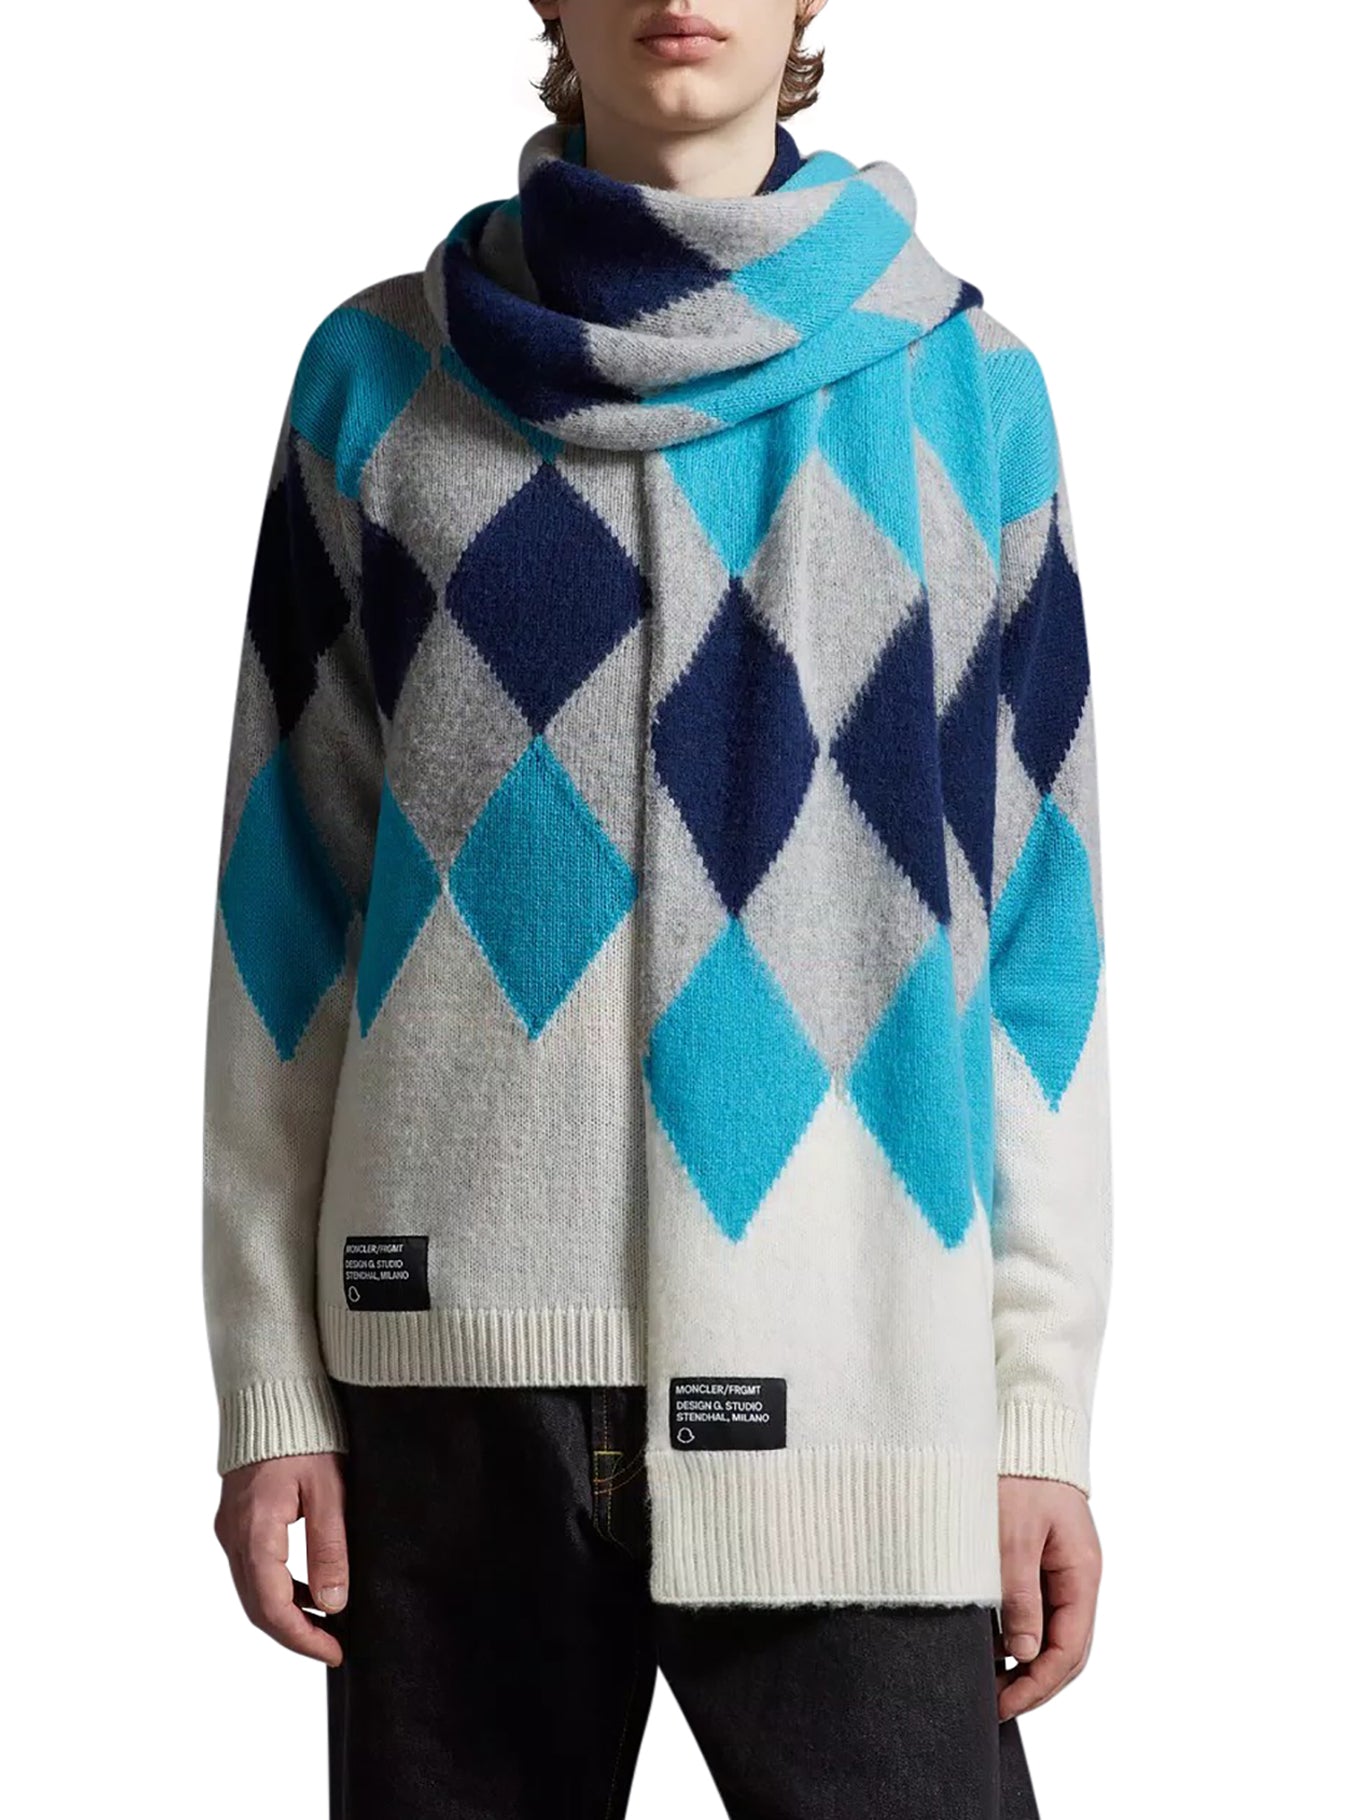 Argyle sweater in wool and cashmere